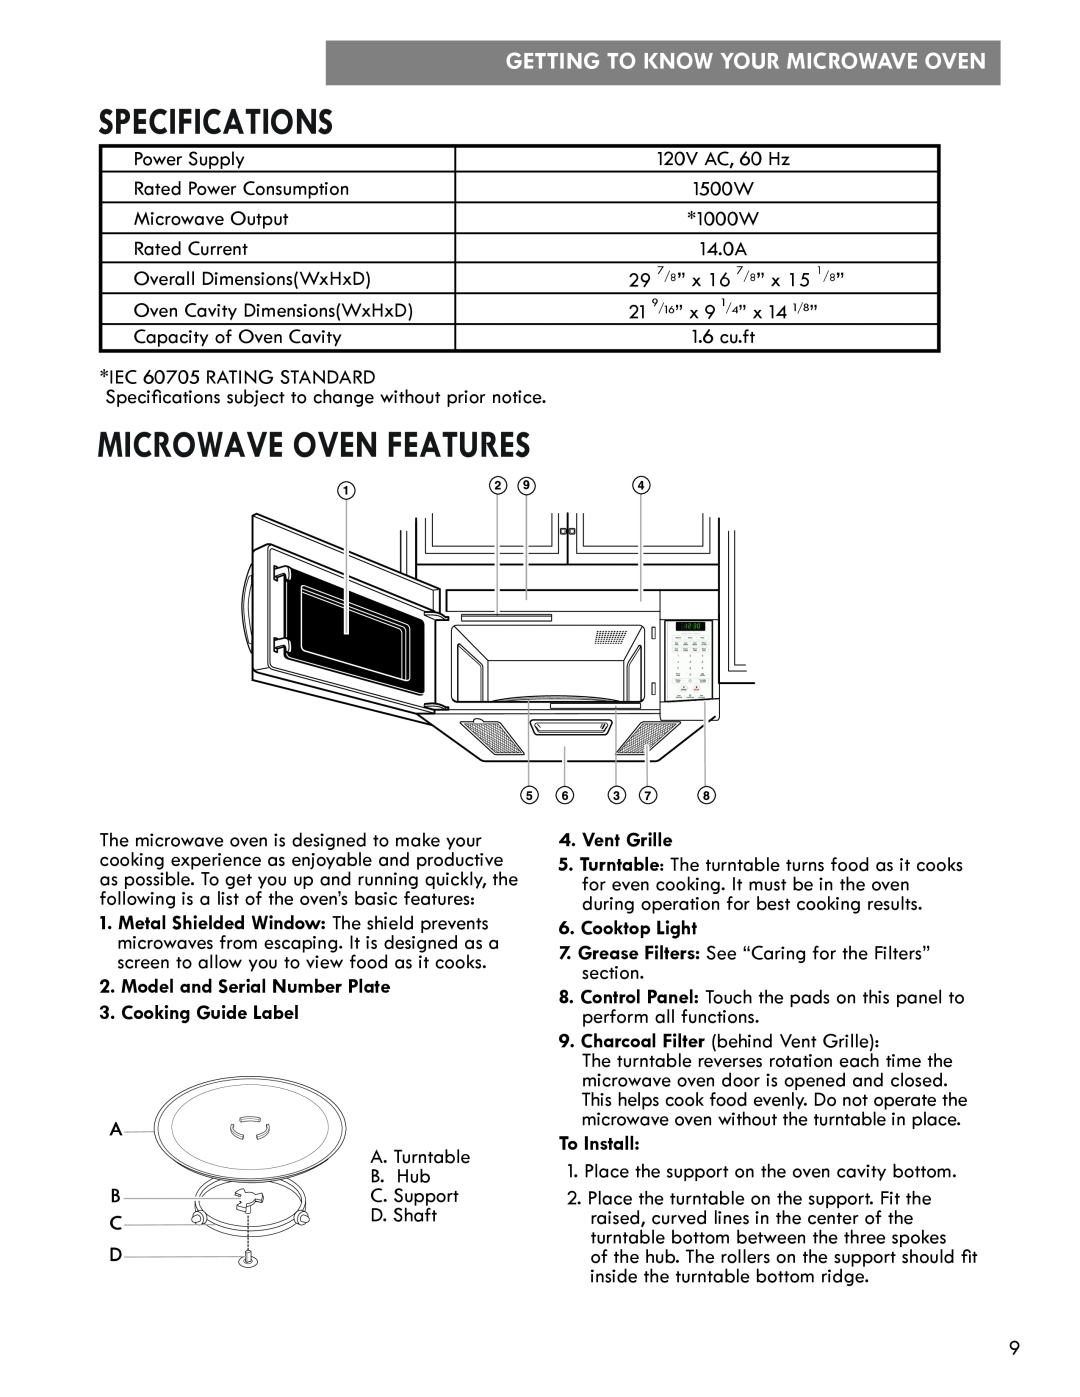 Kenmore 721.8502 manual Specifications, Microwave Oven Features, Getting To Know Your Microwave Oven 